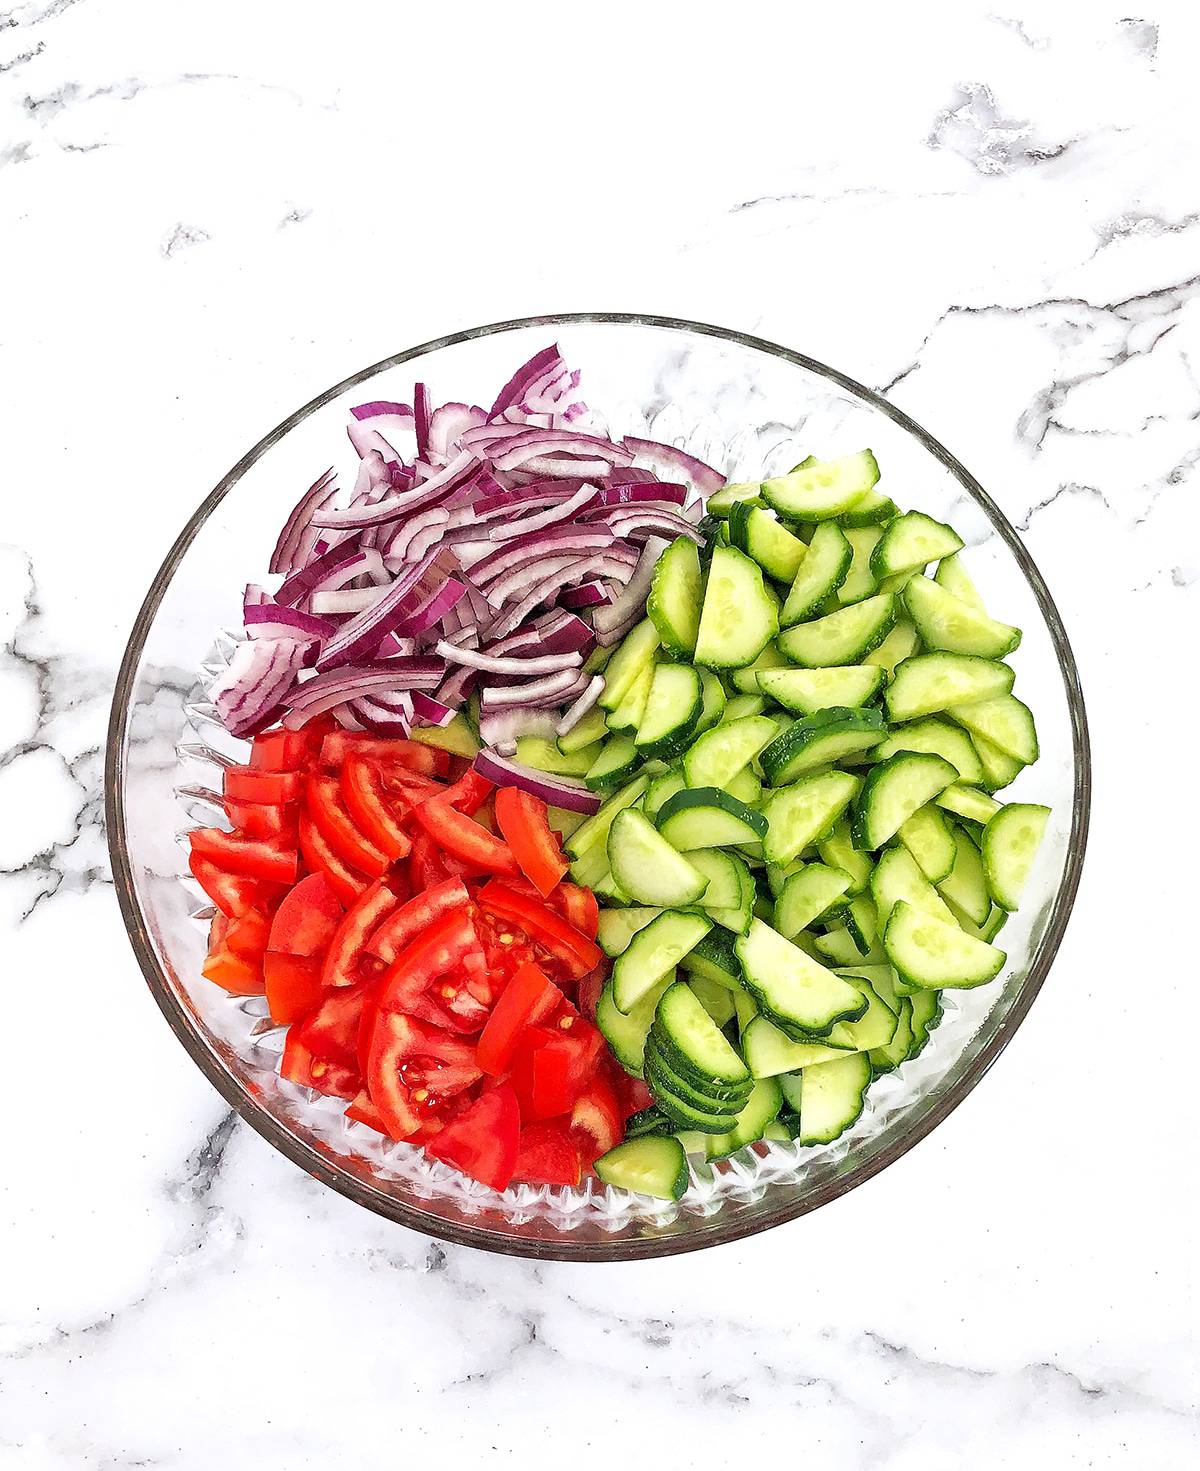 Start by rinsing and slicing vegetables and placing them into a large bowl.